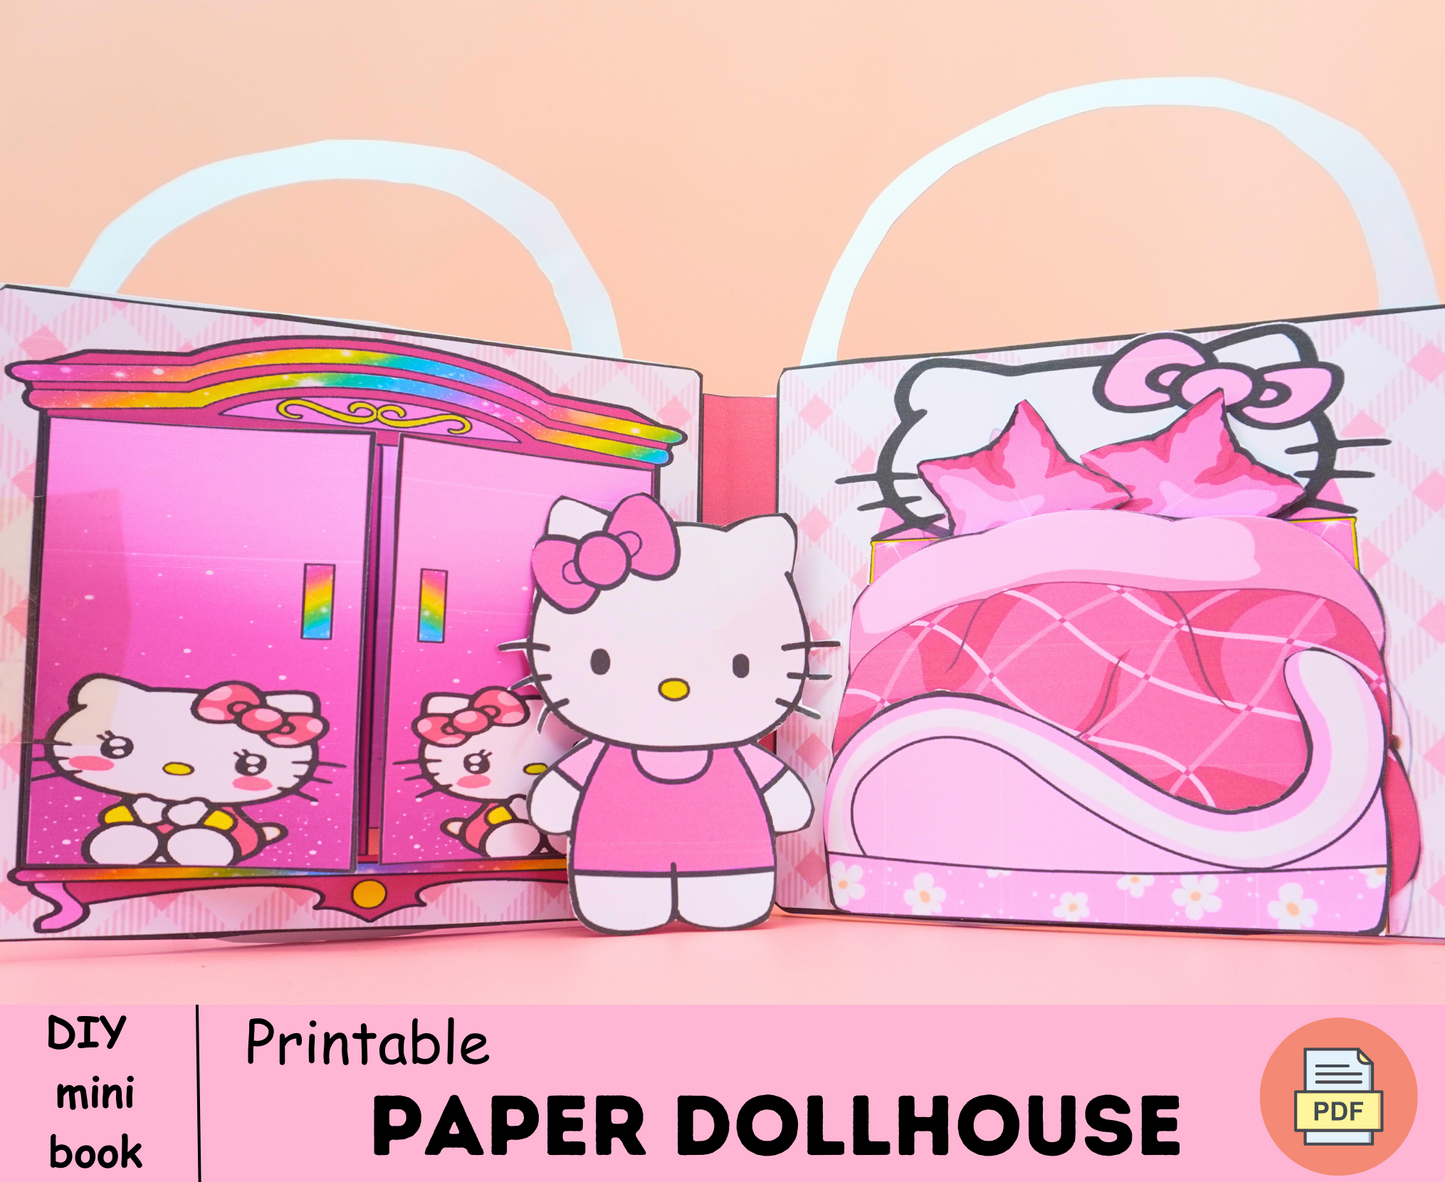 Hello Kitty bag🌈 Busy Book Activity bag for Kitty Printable | Mini Bag | Busy Book print for toddler | Dollhouse Book | DIY paper dolls house🌈 Woa Doll Crafts